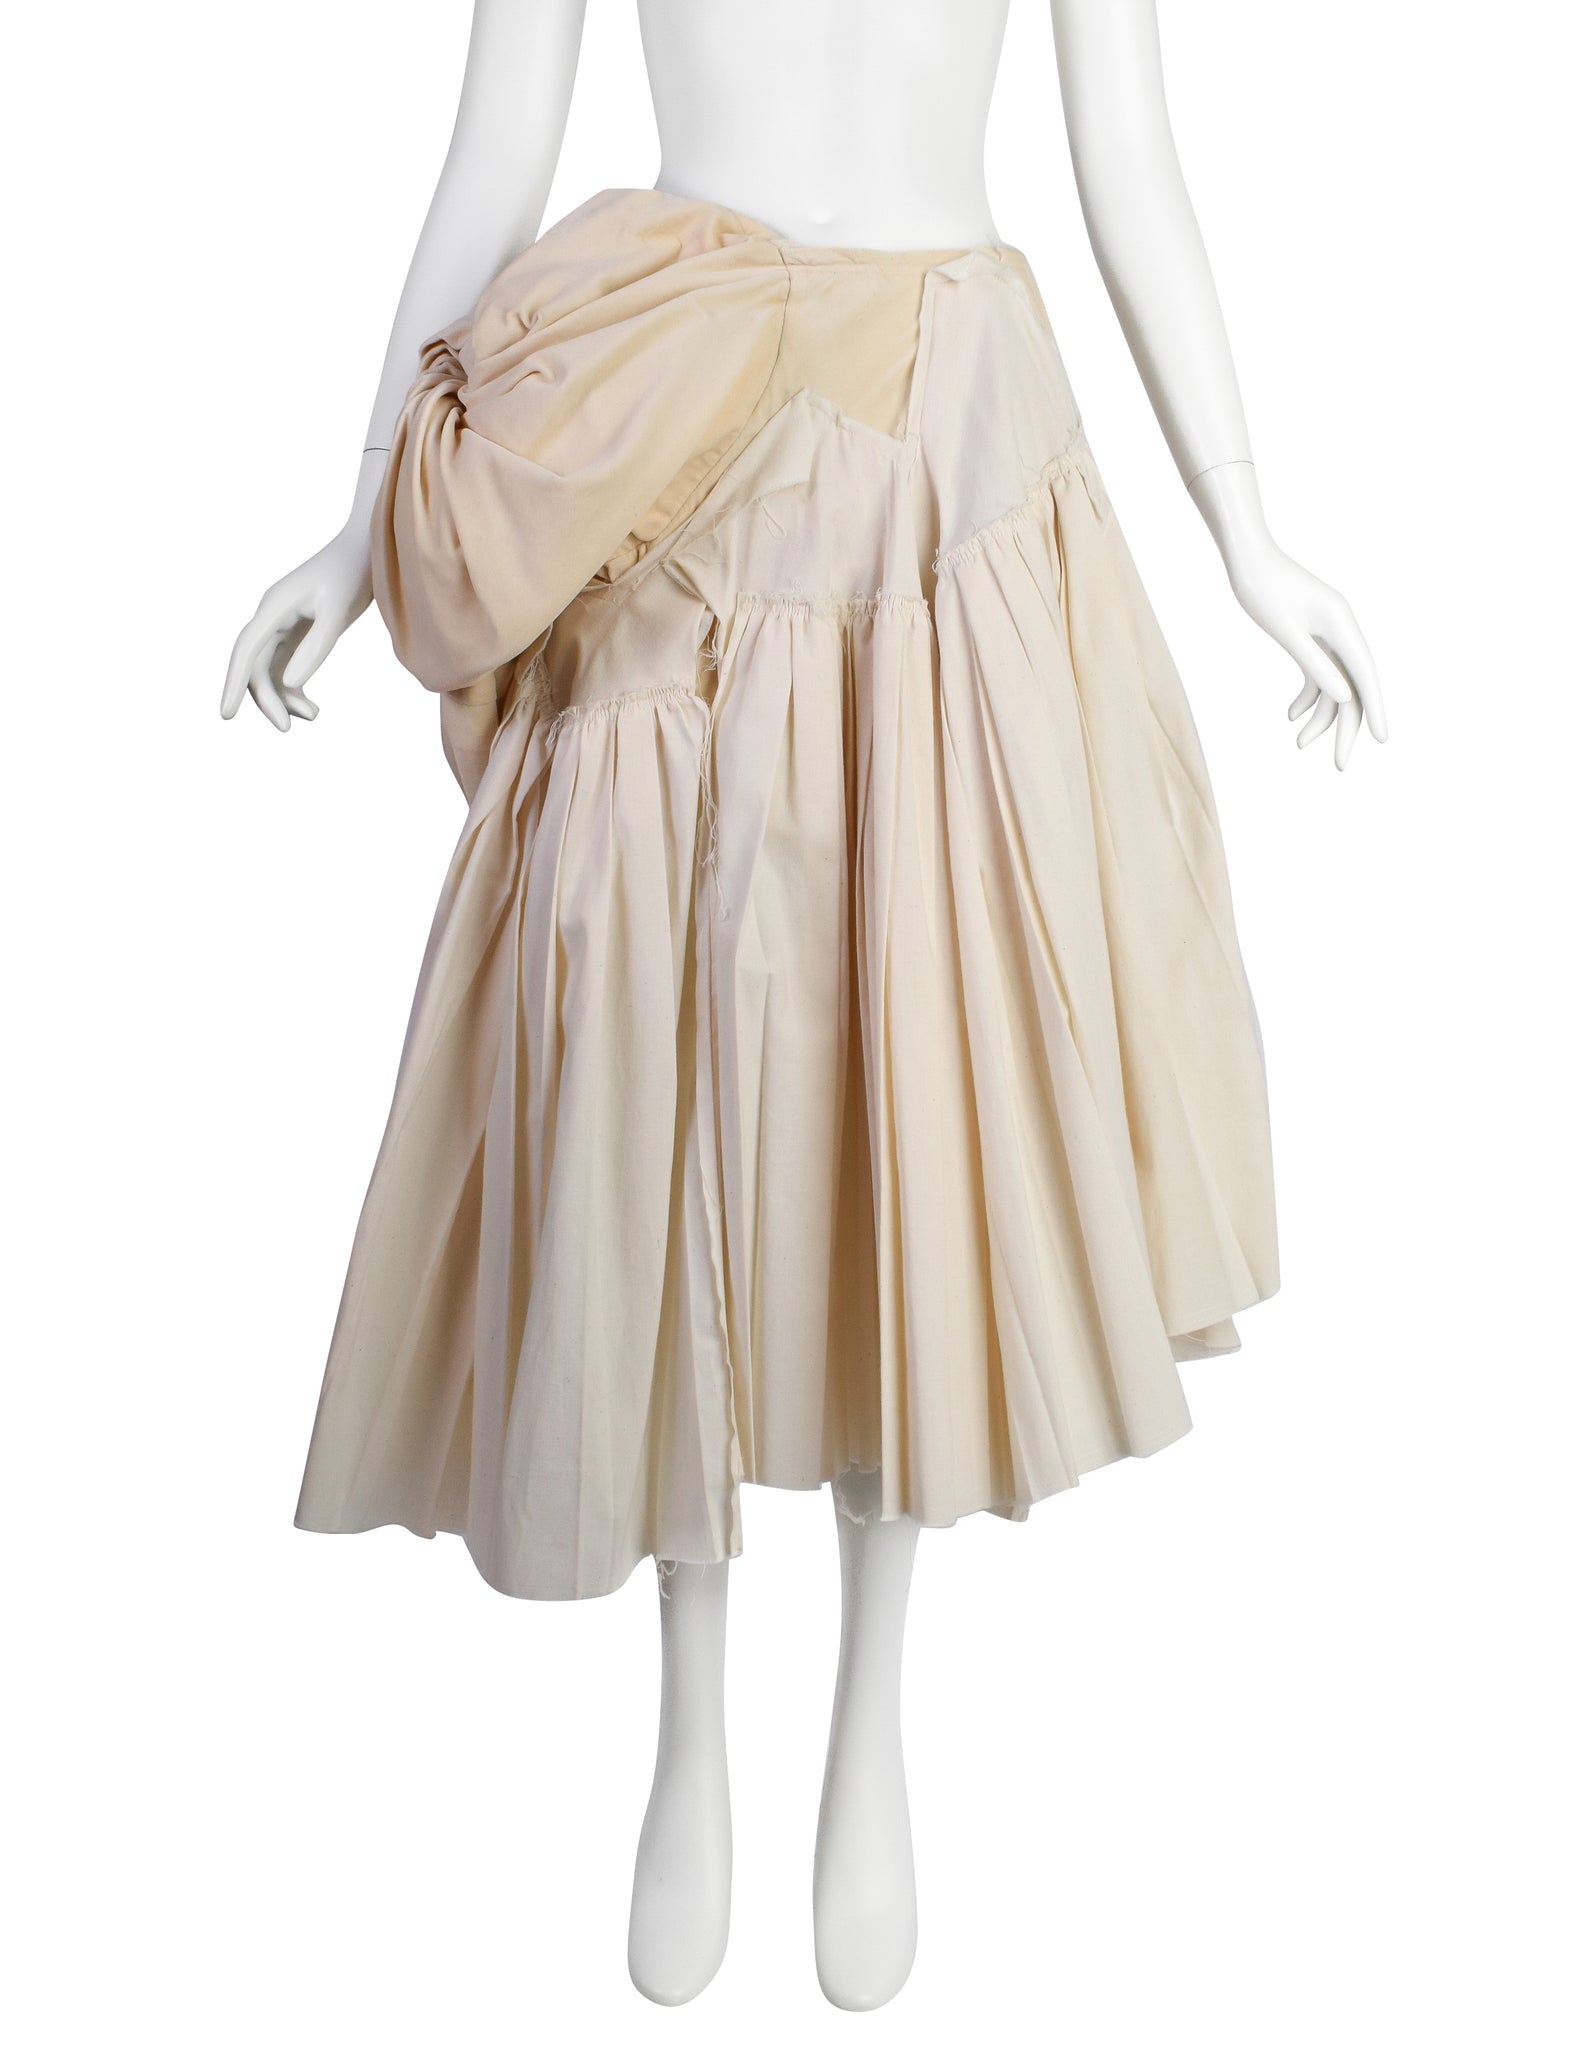 Comme des Garcons Vintage SS 2003 Cream and Ivory Pleated Padded Distressed Deconstructed Skirt